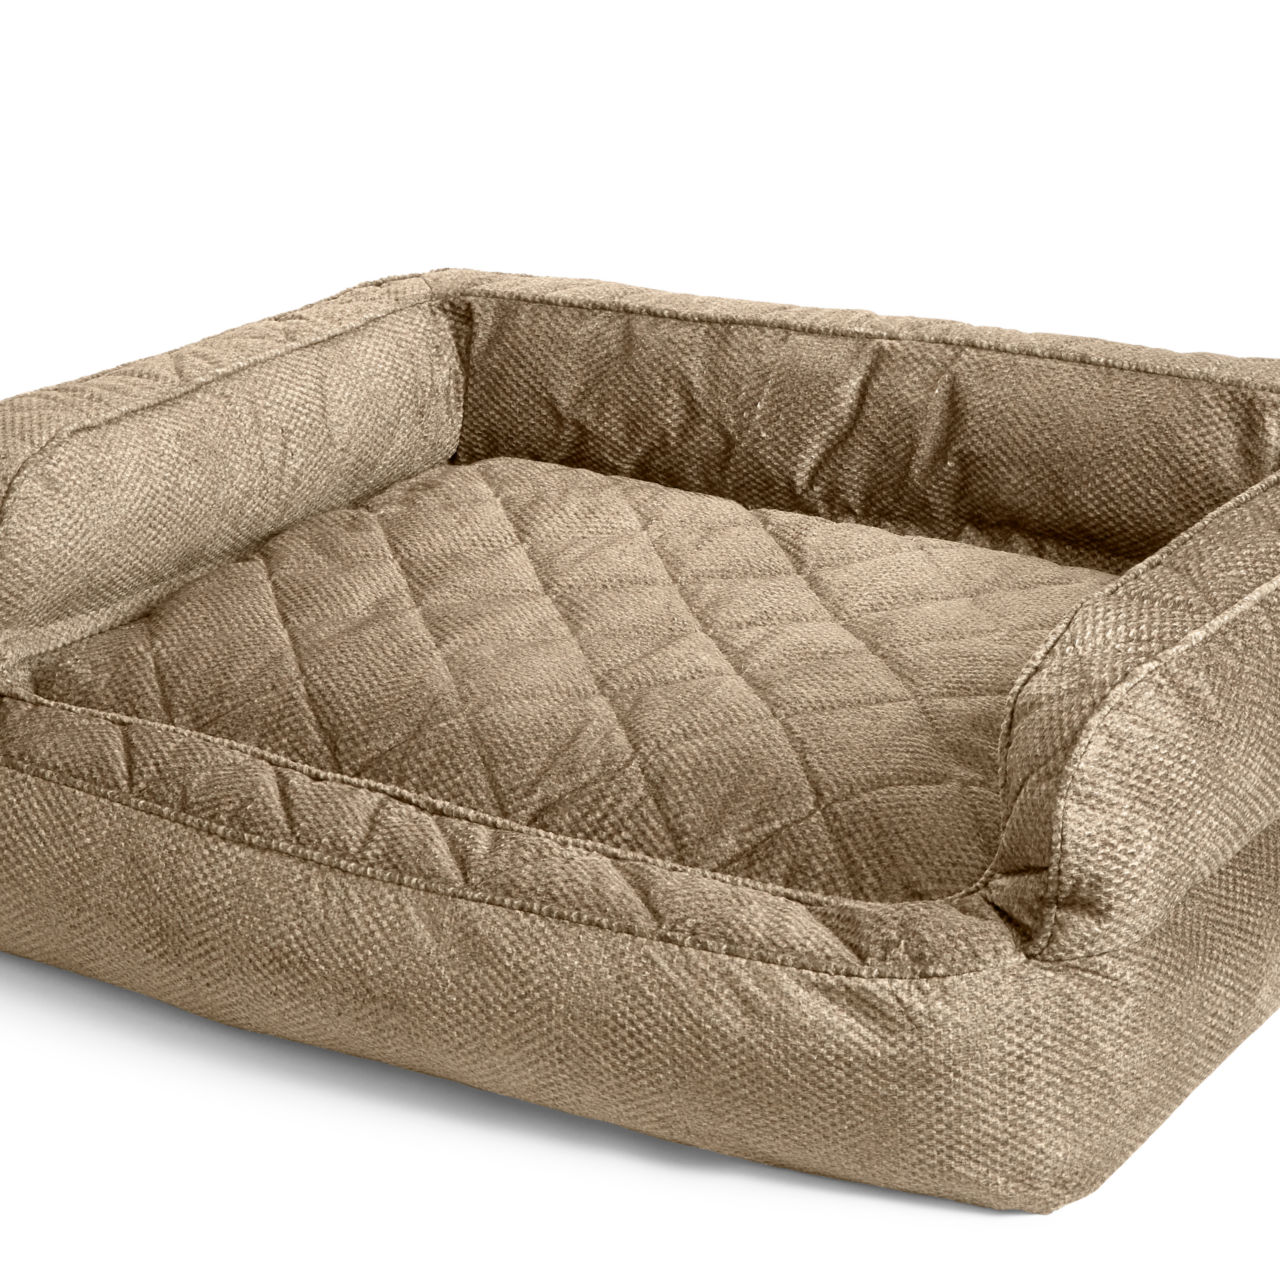 Orvis ComfortFill-Eco™ Couch Dog Bed - BROWN TWEED image number 1